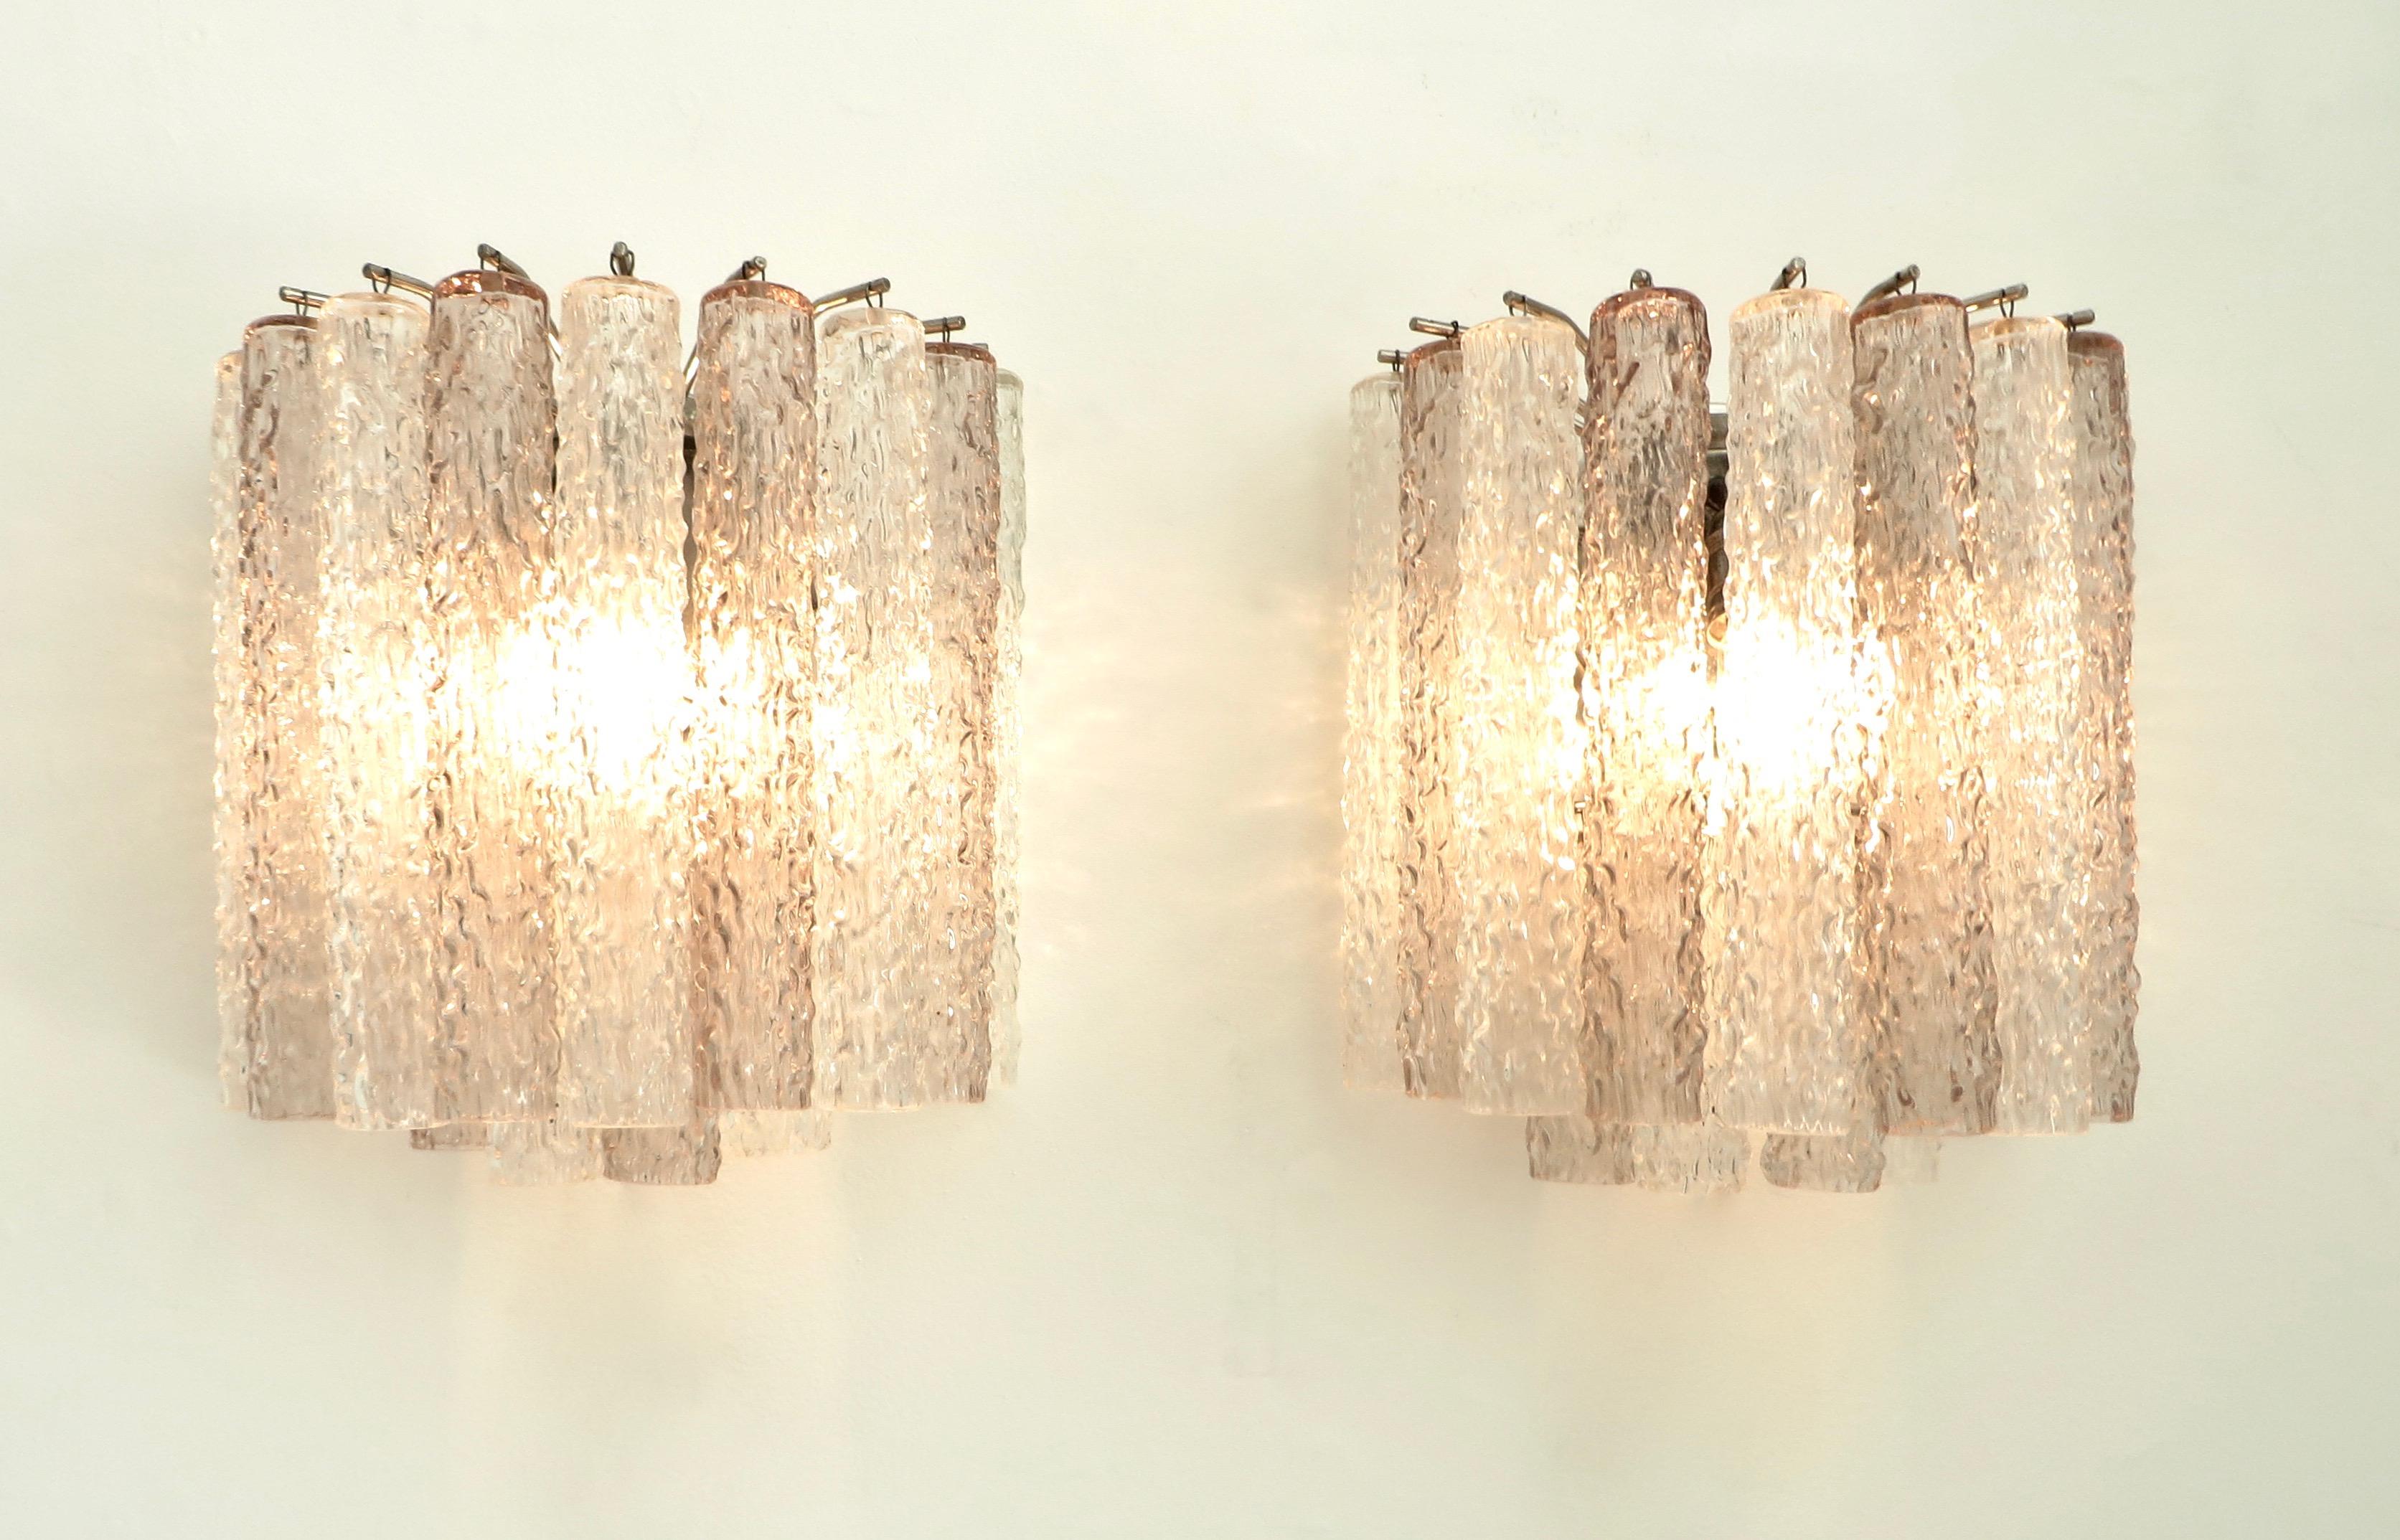 Signed Pair of Venini, made in Italy Murano Tronchi sconces. Pale lavender pink and clear Tronchi Murano glass.
Perfect for a bedroom, powder room or foyer.
Each sconce takes three candelabra bulbs.
Overall size: 11.5